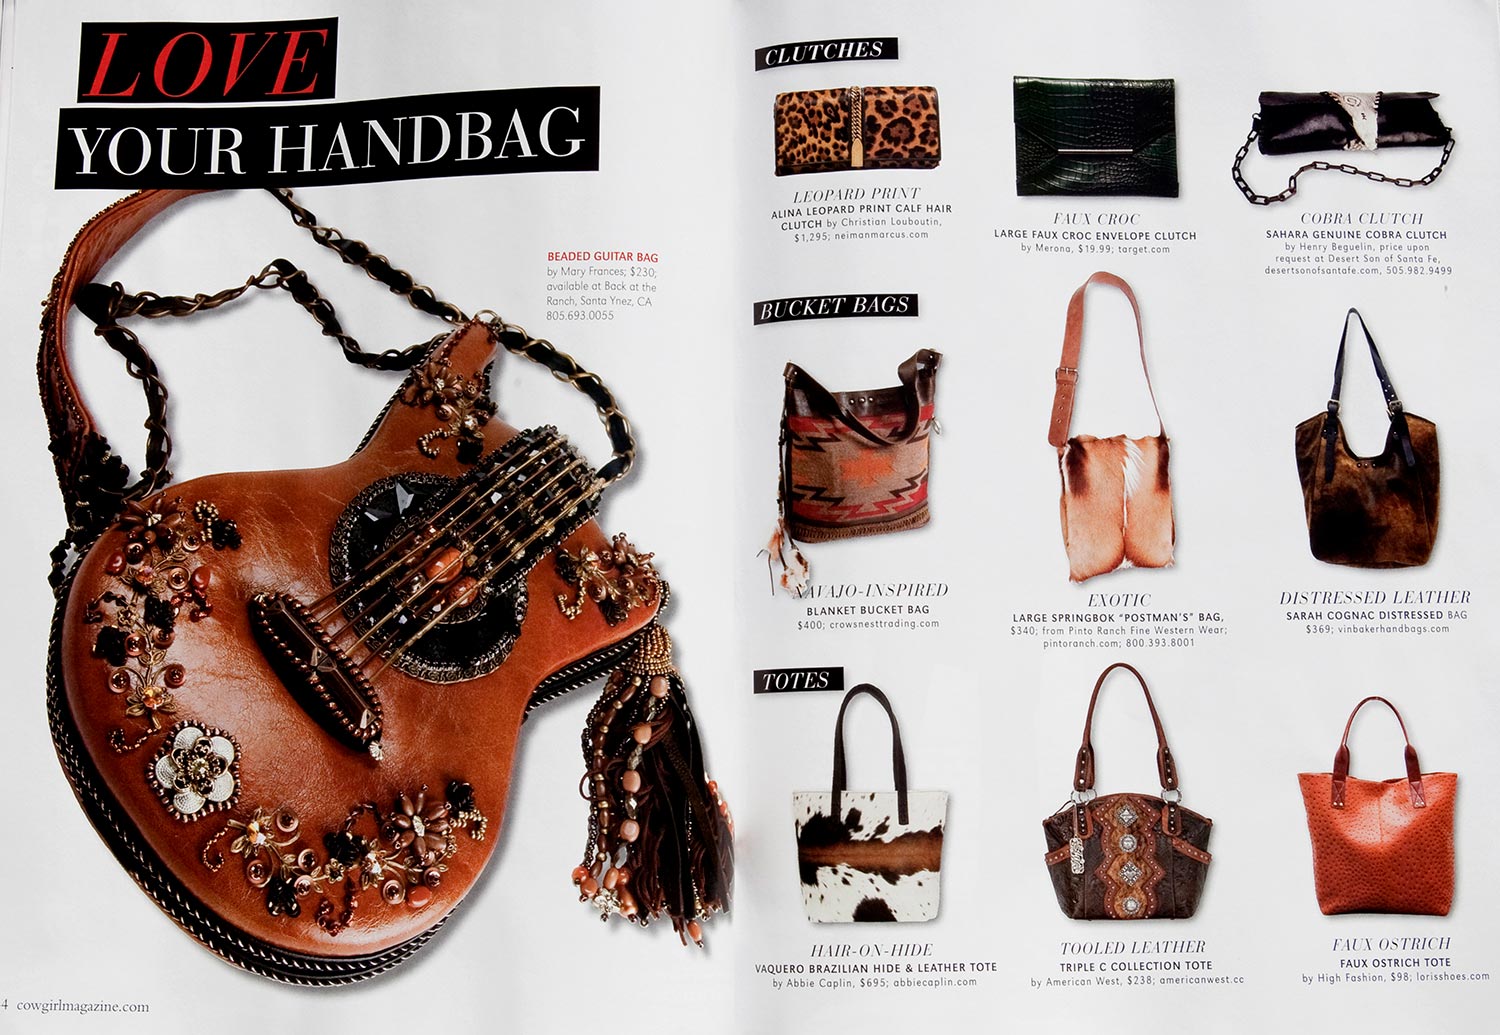 A magazine spread with a variety of handbags and accessories.